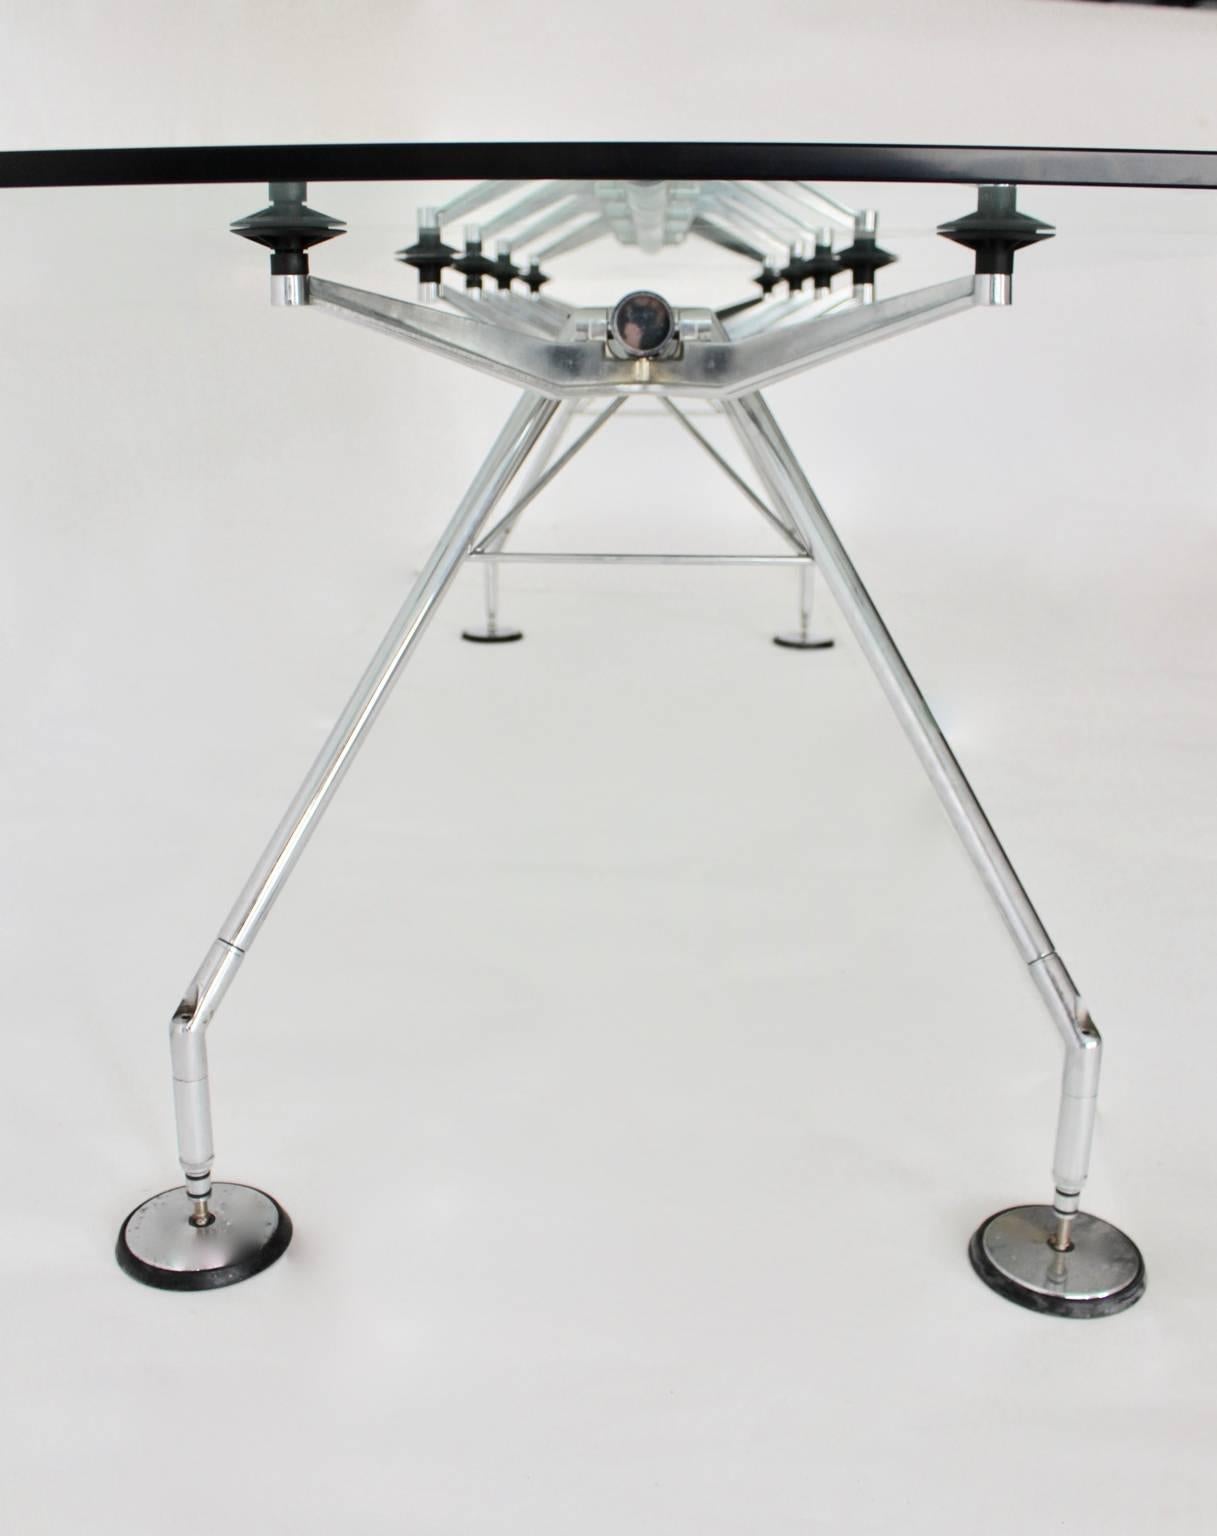 20th Century Modernist Vintage Chrome and Glass Dining Table Nomos by Sir Norman Foster 1986  For Sale